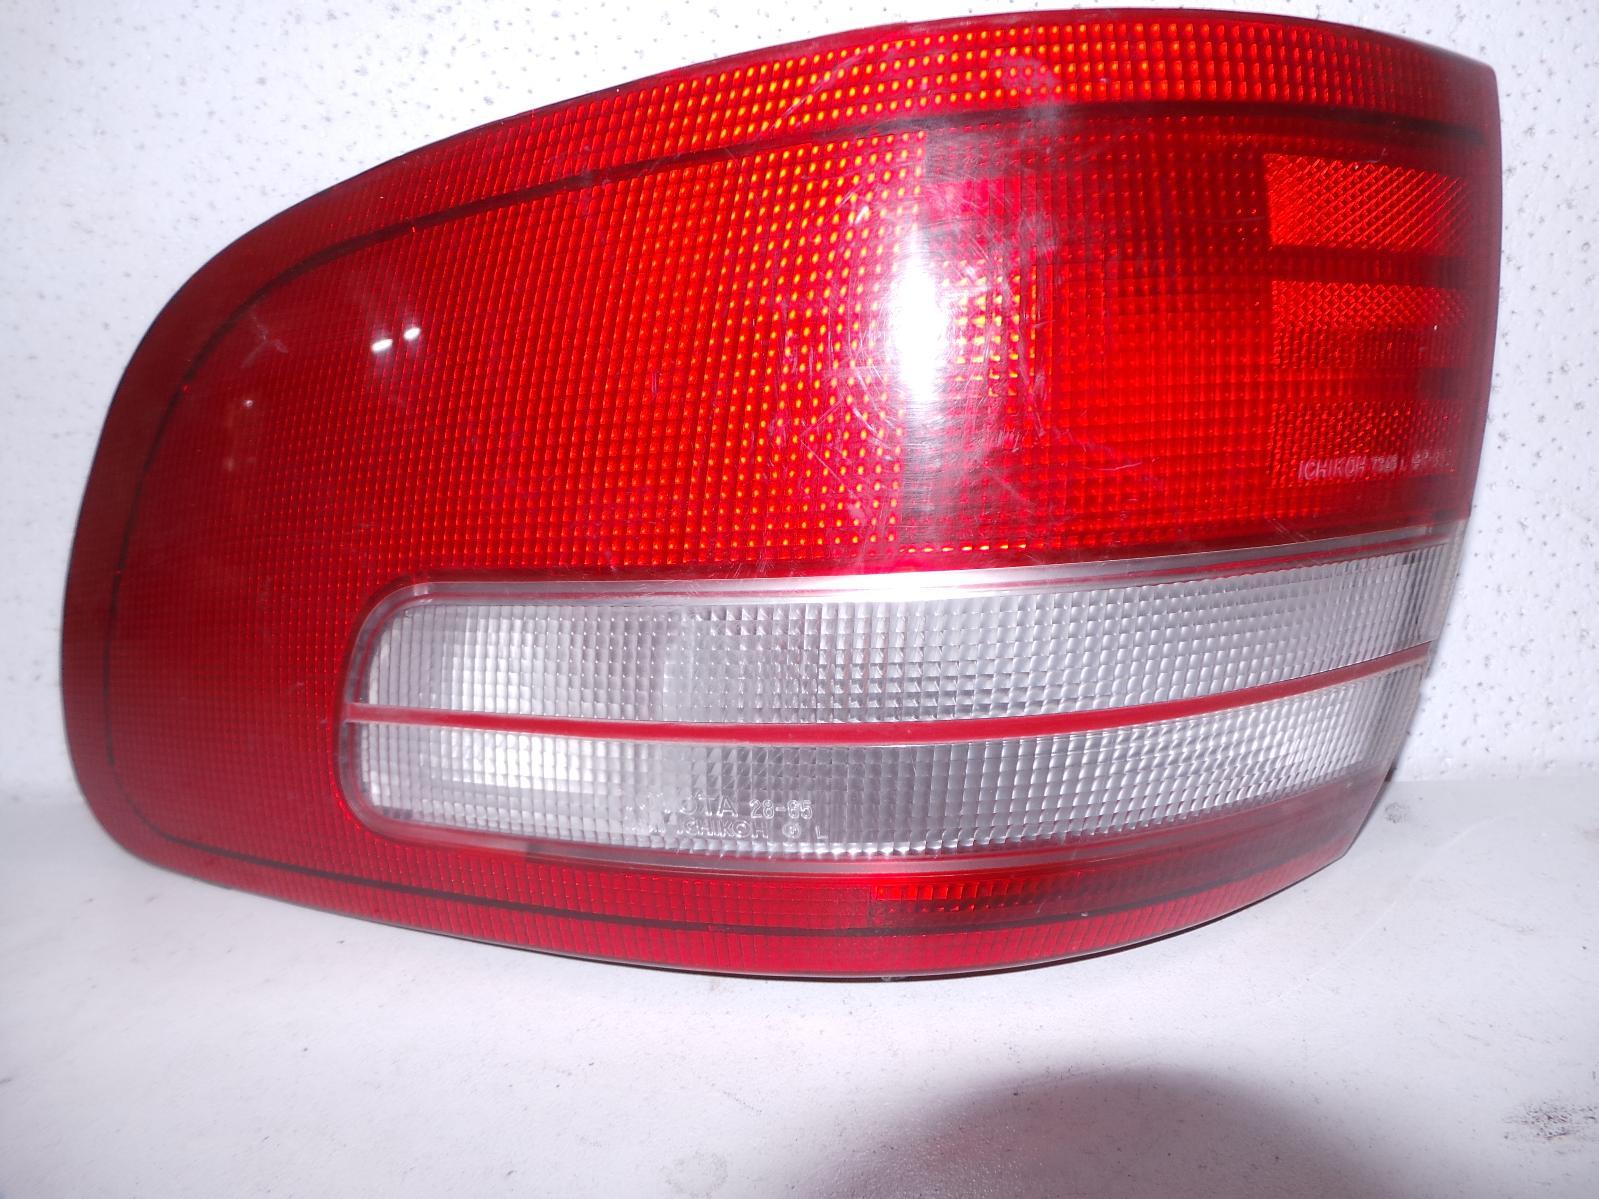 TOYOTA ESTIMA, Left Taillight, CLEAR LENS W/ RED STRIPE, LENS# 28-65, 91-95 (IMPORT)